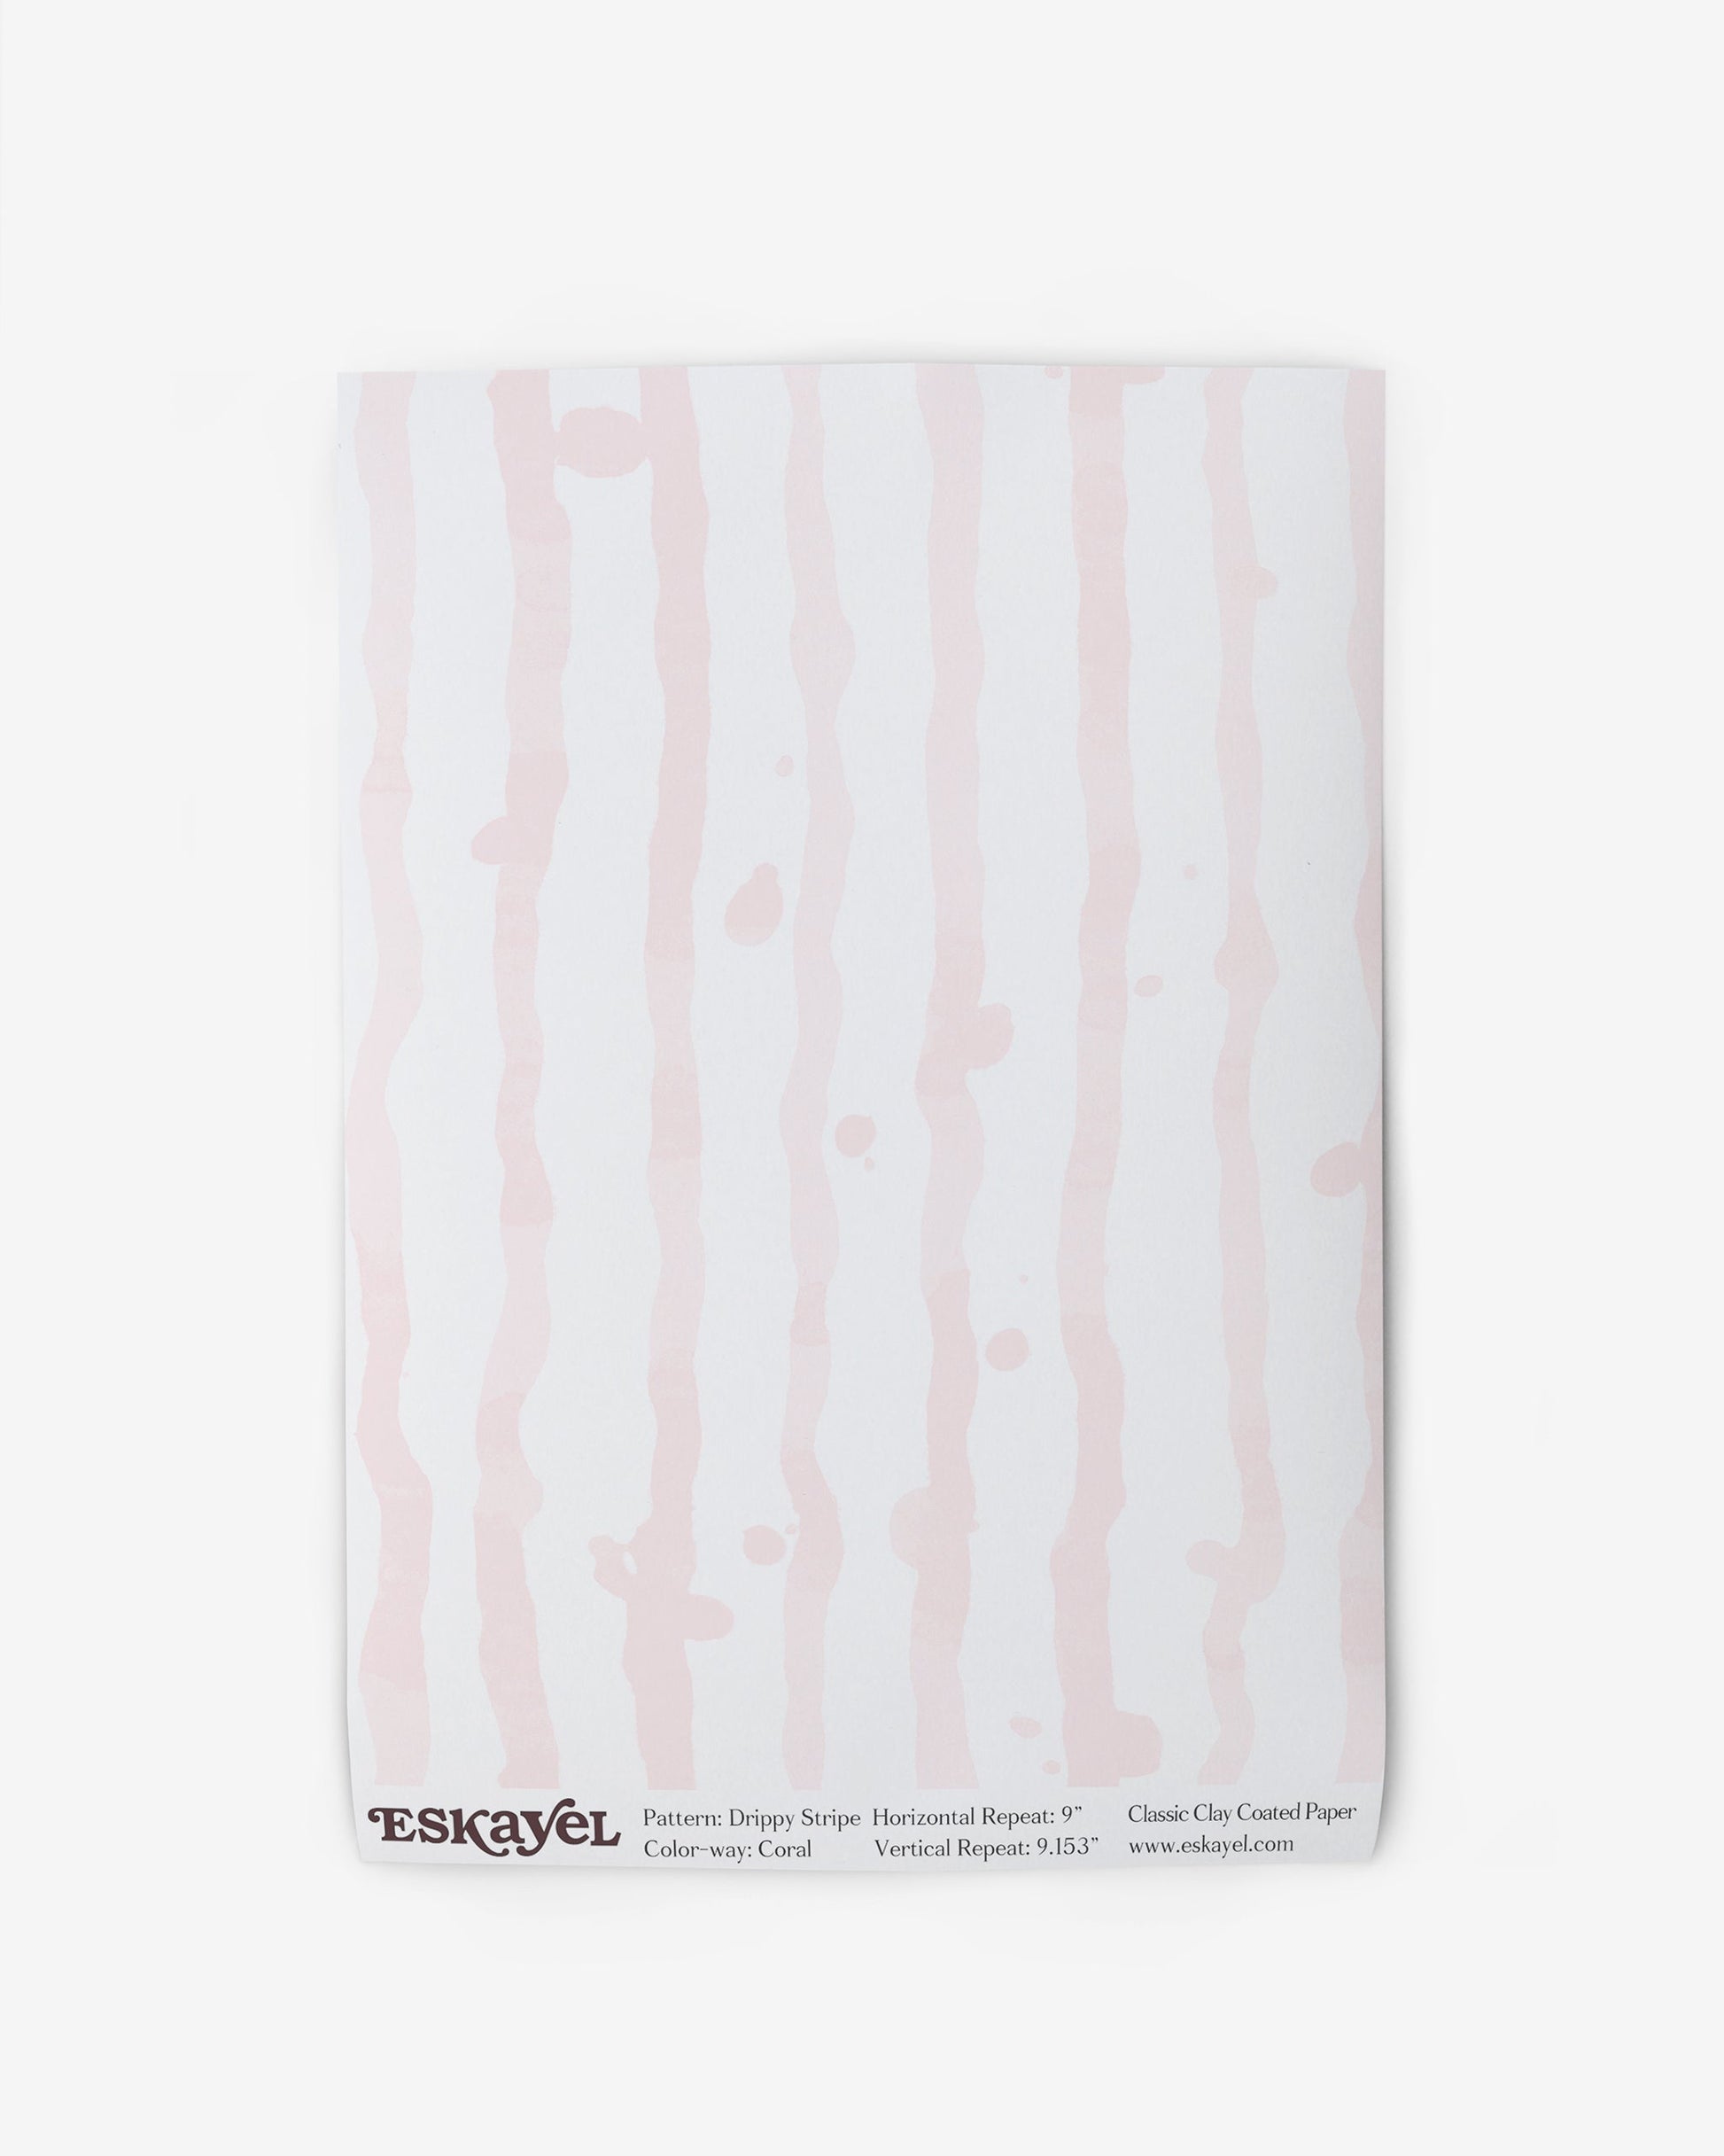 A white Drippy Stripe Wallpaper Sample Coral with pink and white stripes on it